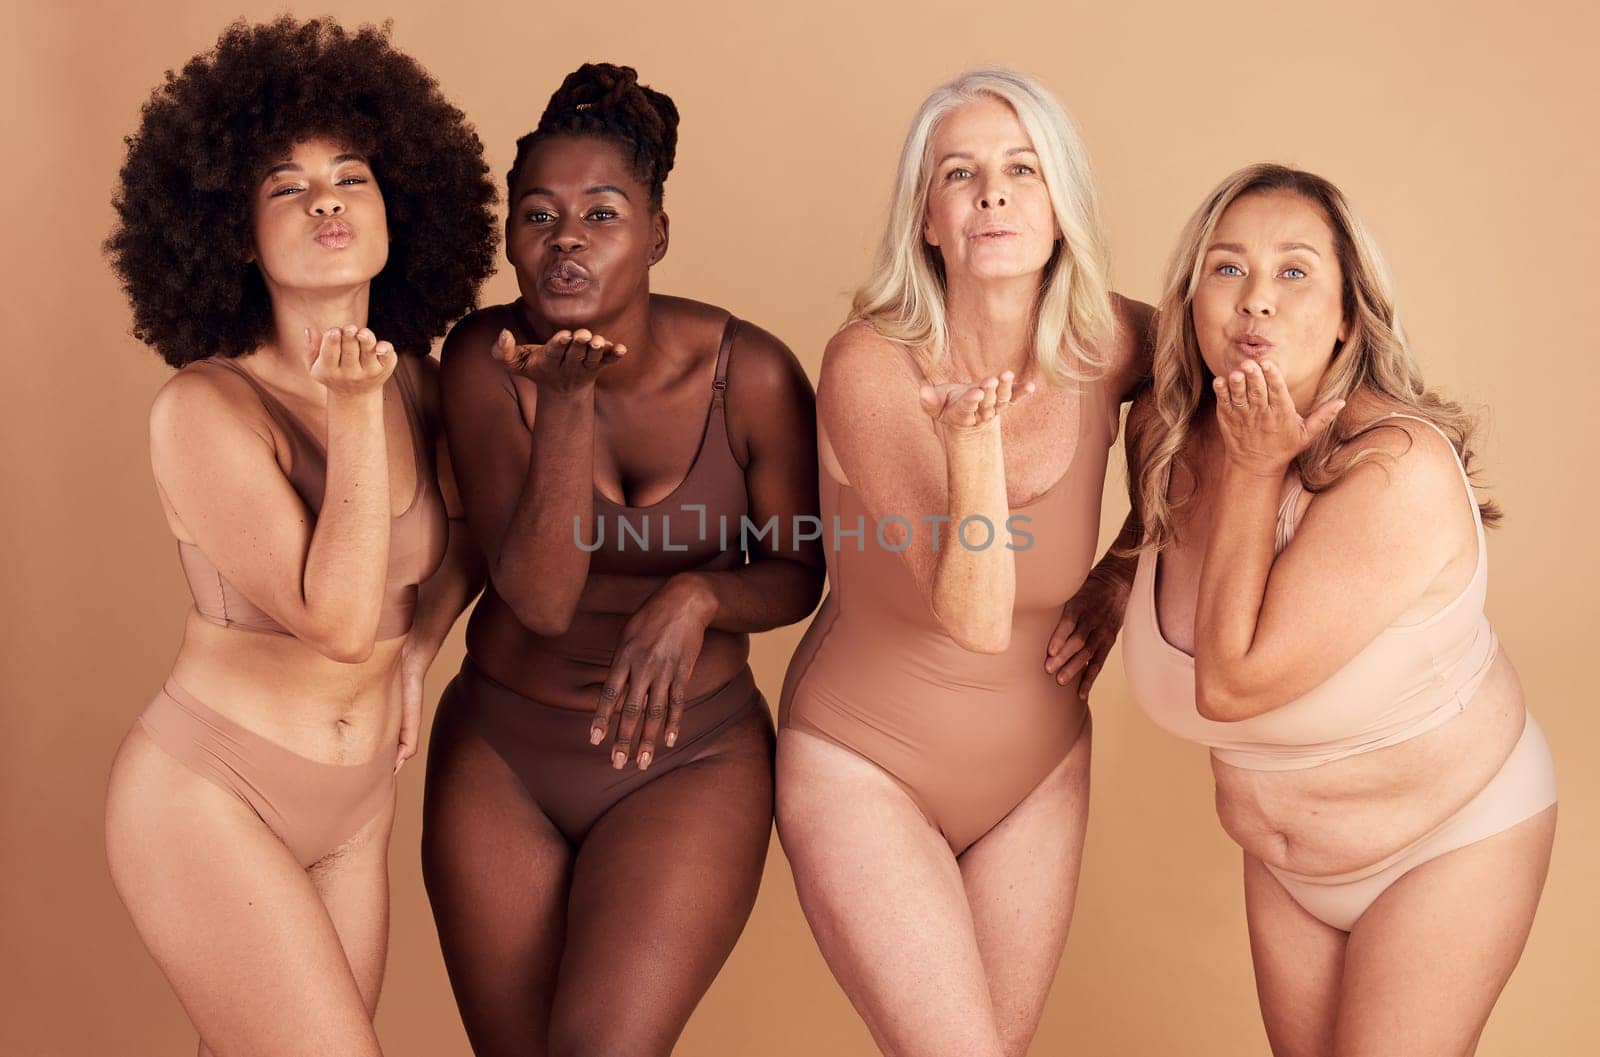 Women, body and different shape group blowing a kiss in studio for lingerie, beauty and diversity wearing underwear. Portrait of female friends together for body positivity, inclusion and self love.